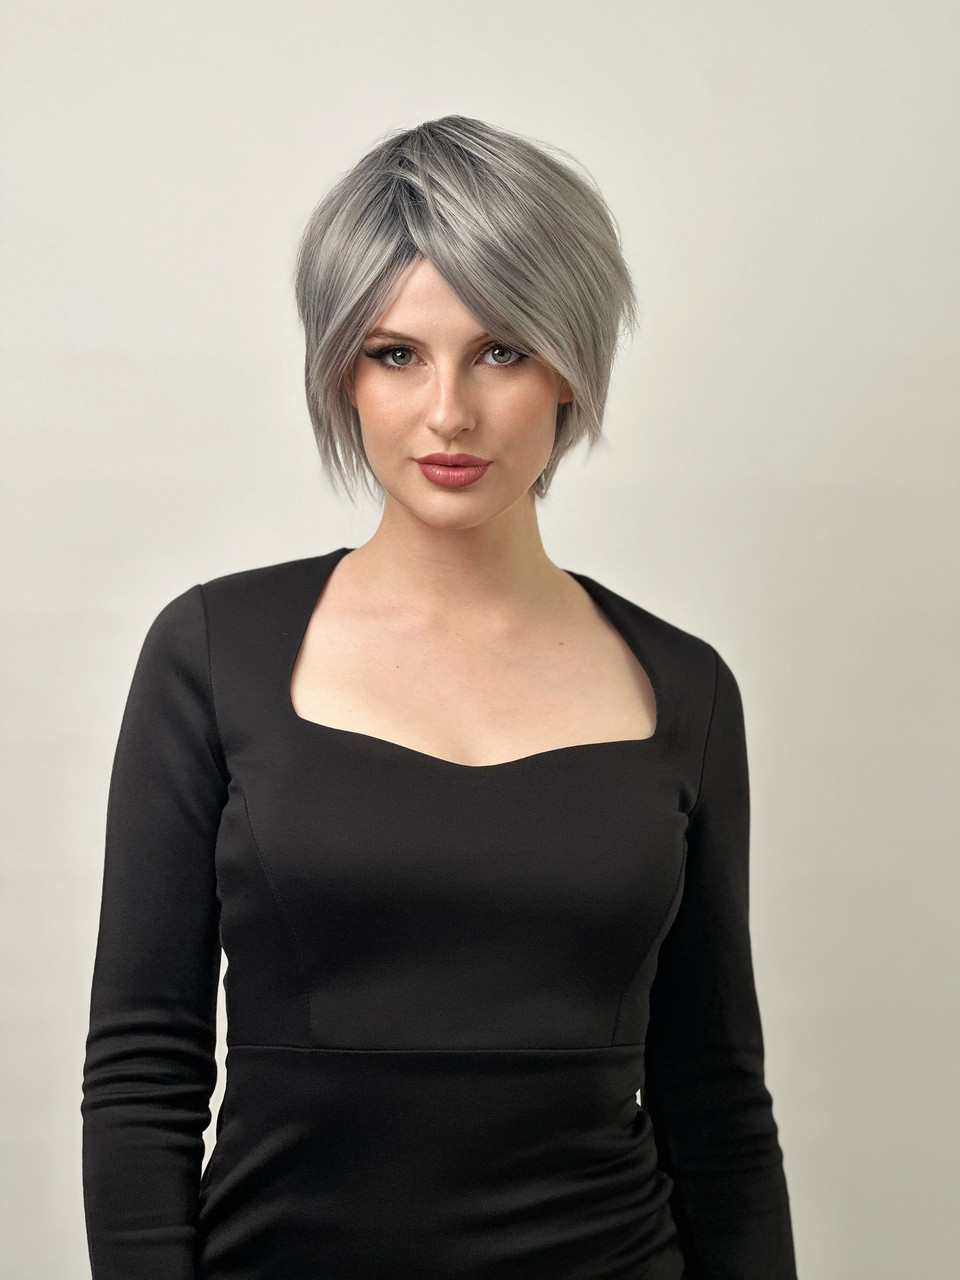 Black and Grey Ombre Women's Wig